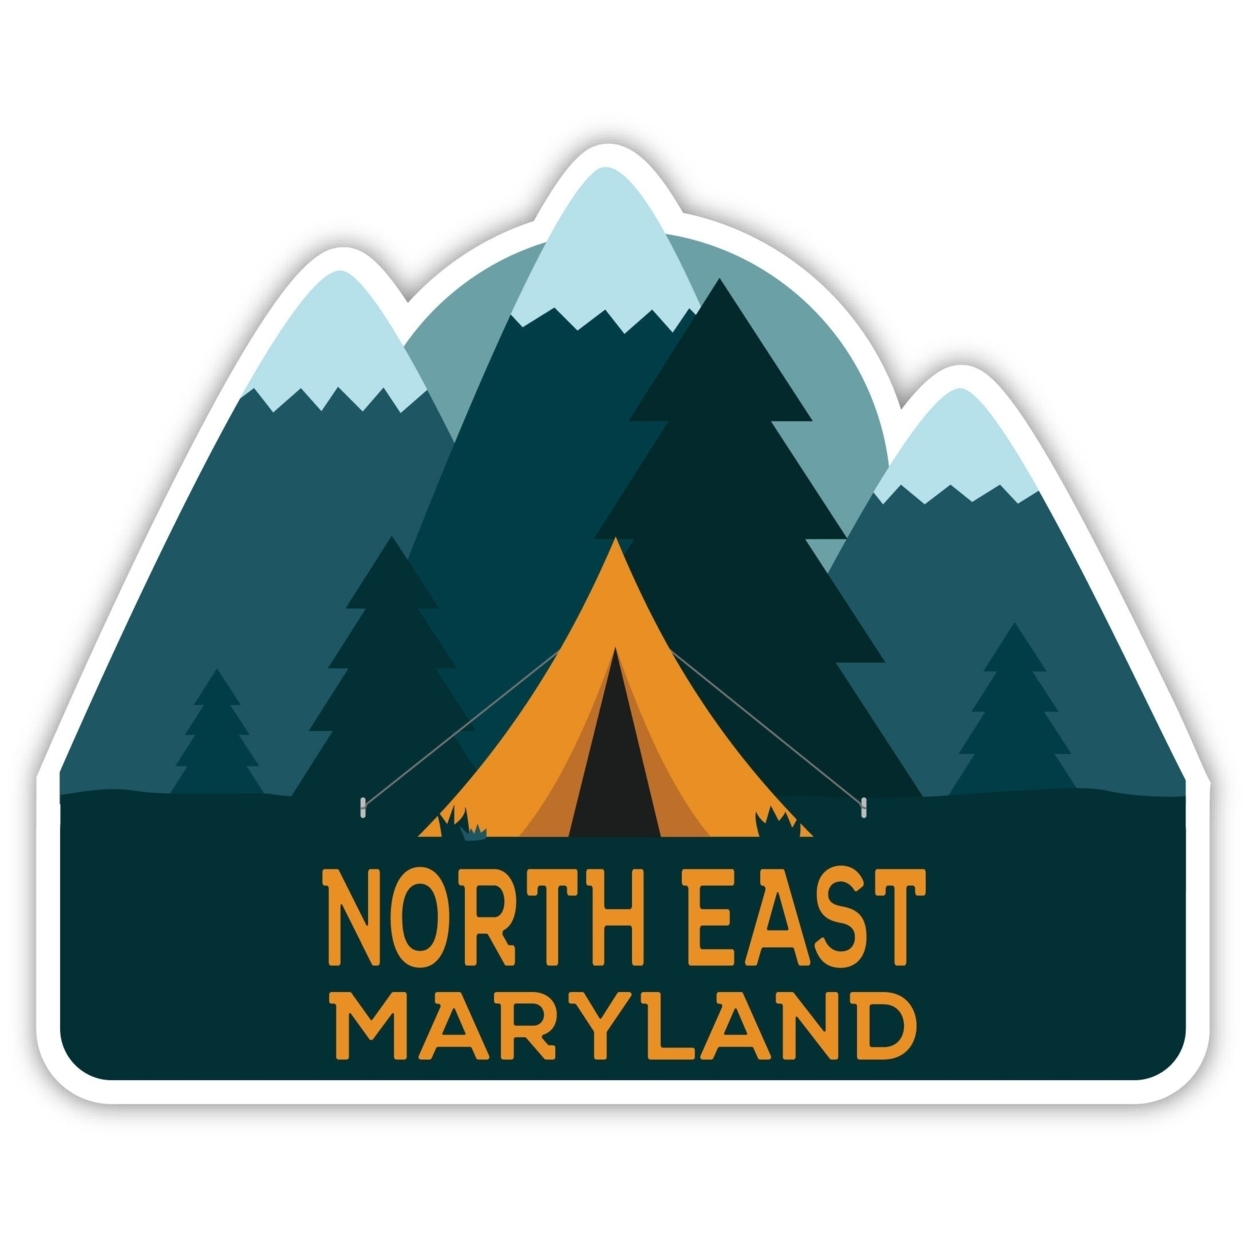 North East Maryland Souvenir Decorative Stickers (Choose Theme And Size) - Single Unit, 4-Inch, Tent